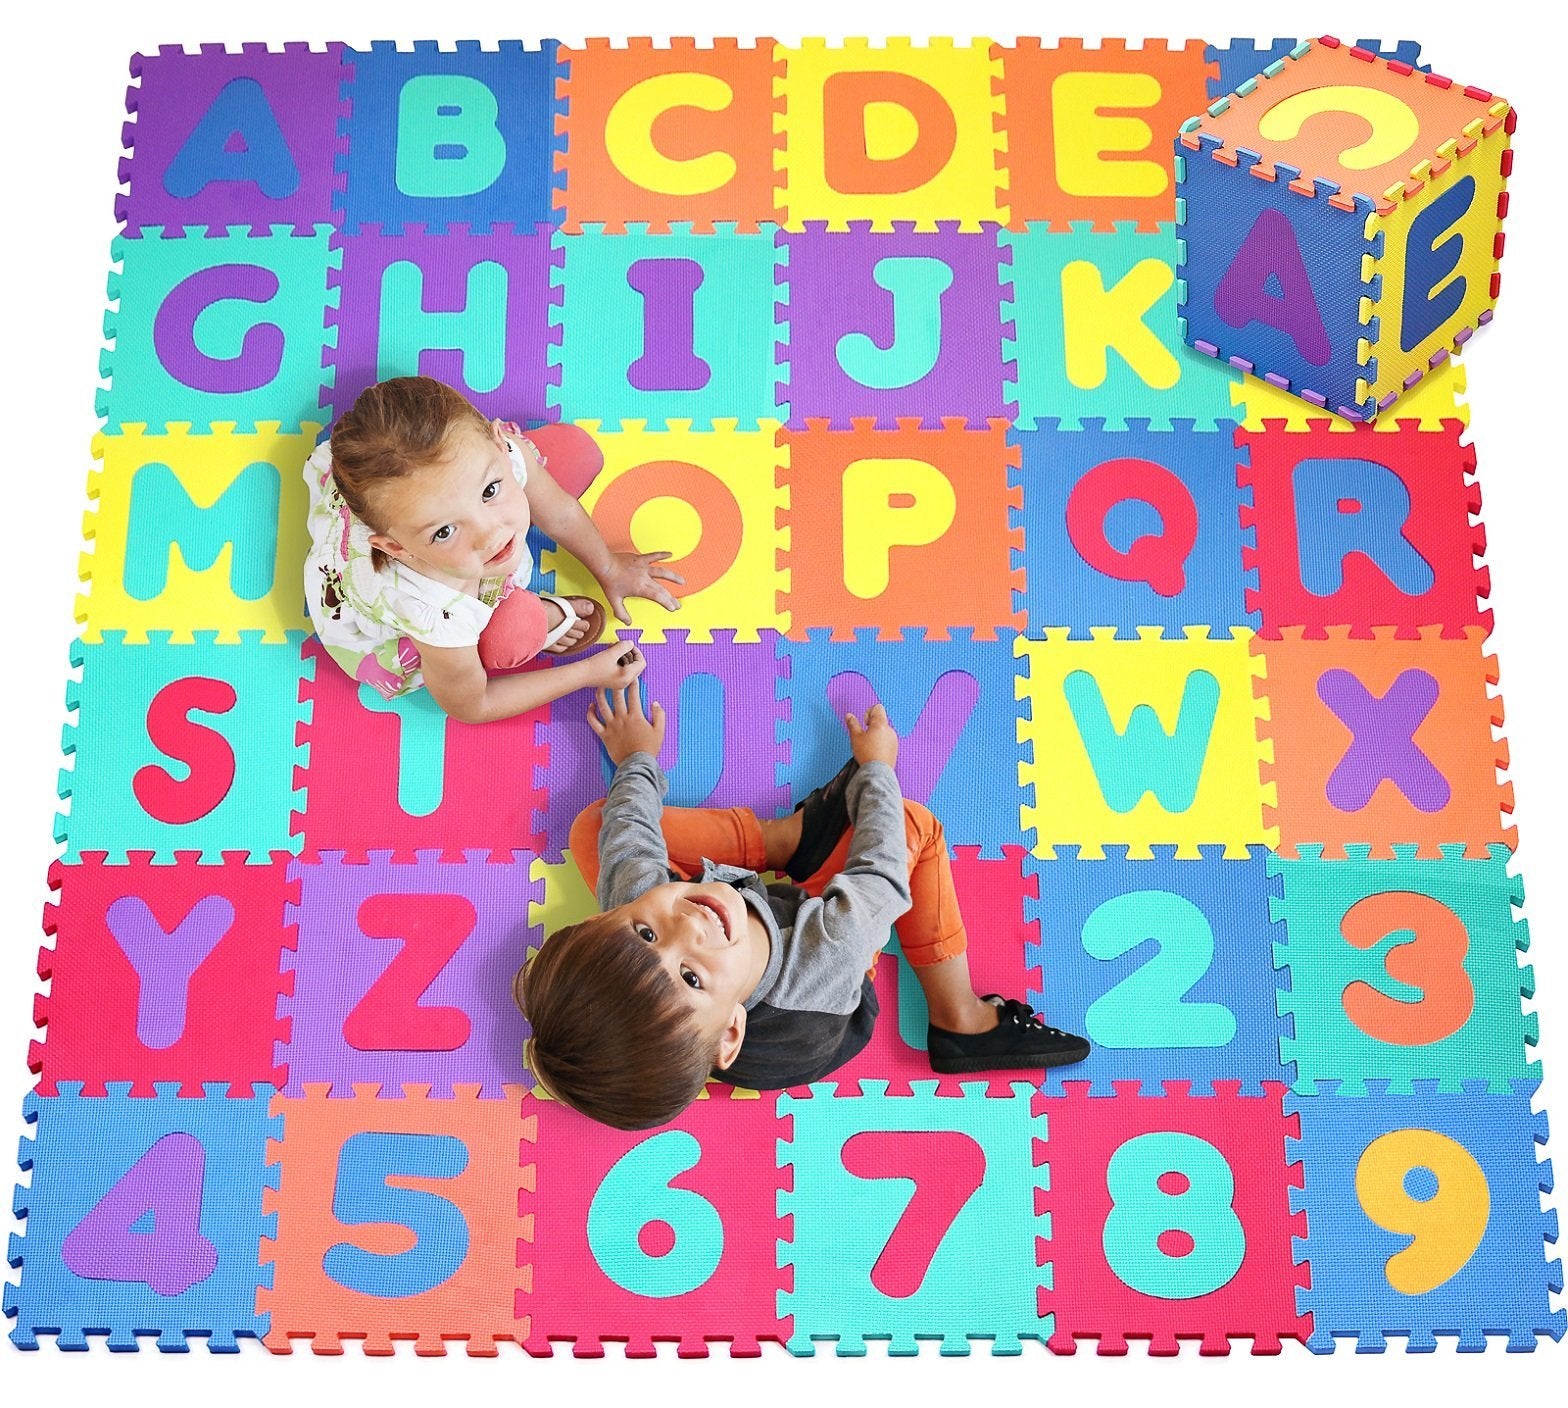 Click N' Play, Alphabet and Numbers Foam Puzzle Play Mat, 36 Tiles (Each Tile Measures 12 X 12 Inch for a Total Coverage of 36 Square Feet)